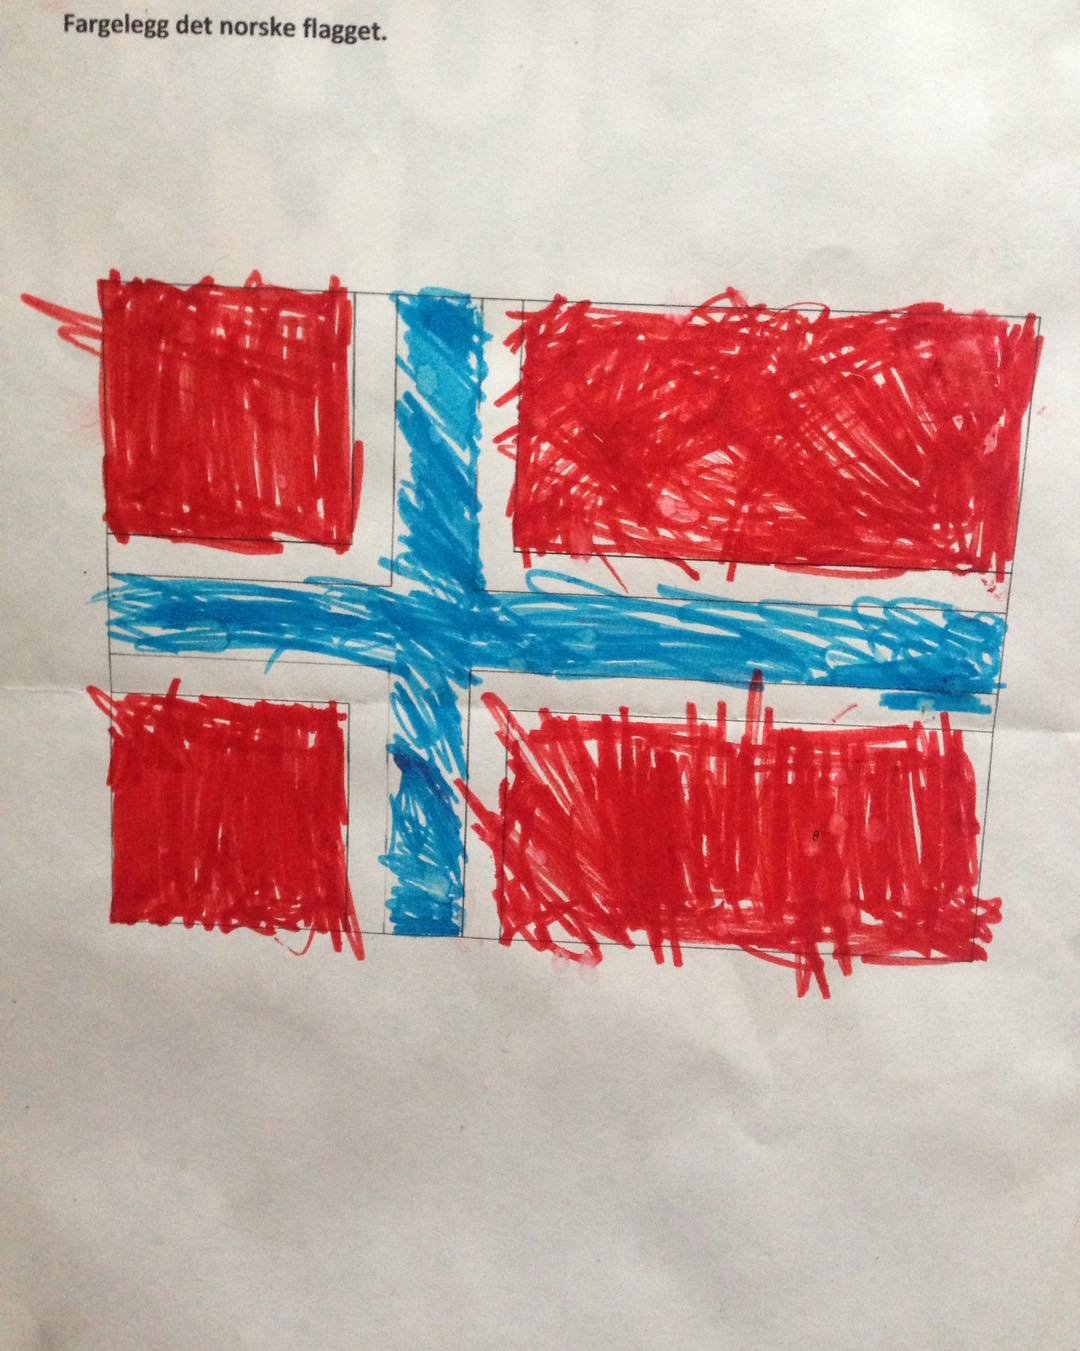 Hey hey! Hoorah for Norway. Tomorrow Friday May 17 is Norway&rsquo;s Constitution Day. 210 years old, is that constitution. Our brewmaster is Norwegian-American, and remembers walking in The children&rsquo;s parade and eating hot dogs and ice cream e